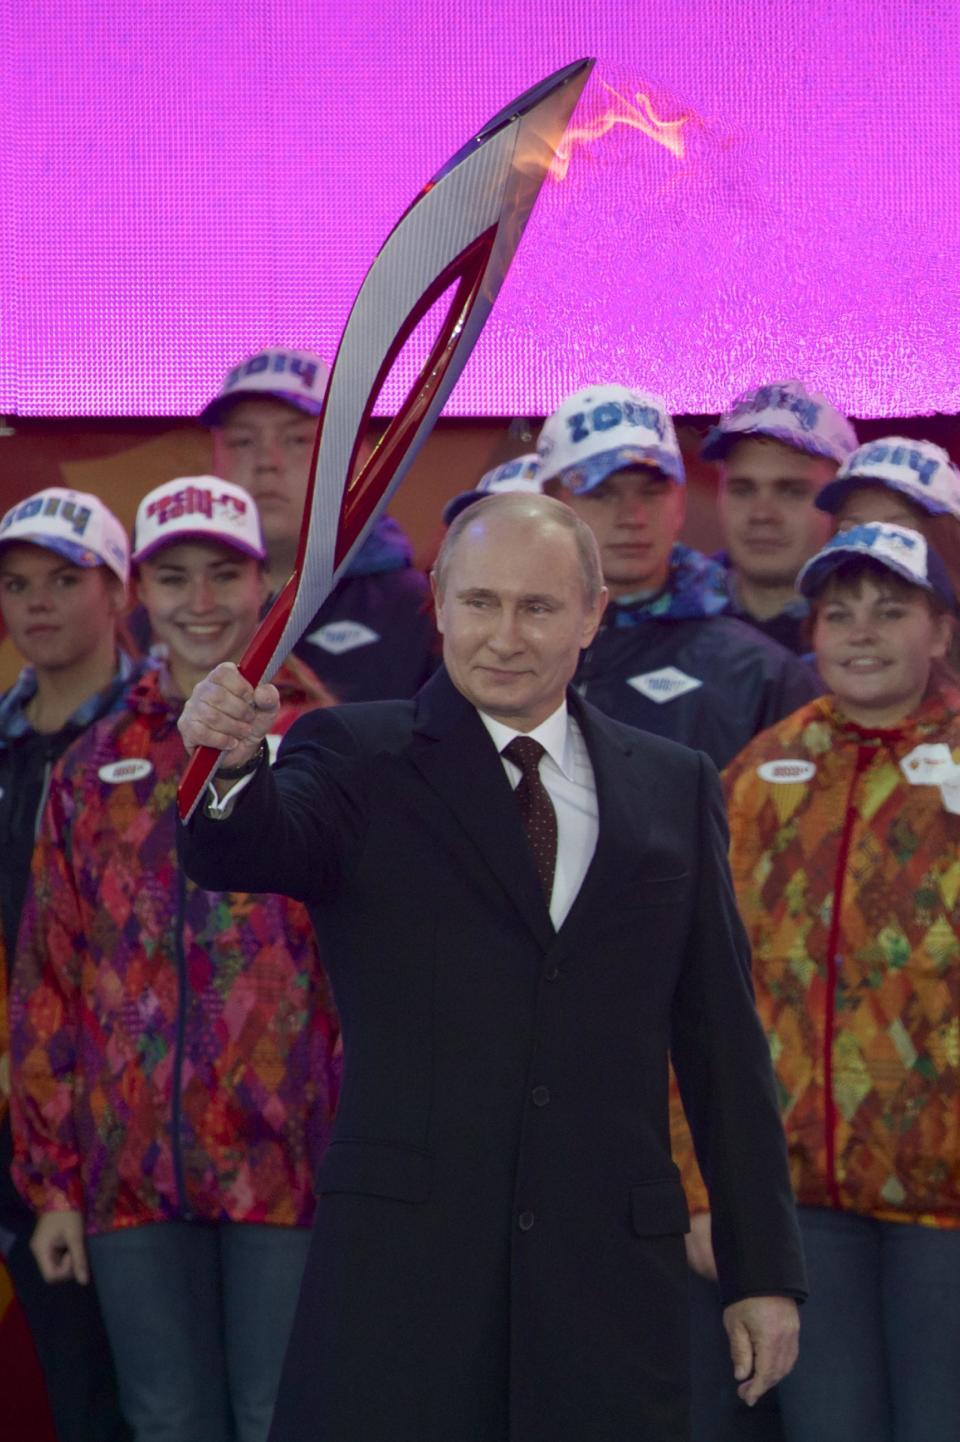 FILE - In this Sunday, Oct. 6, 2013 file photo Russian President Vladimir Putin smiles while ceremonially lighting the Olympic flame with a torch at Moscow's Red Square prior to the 123-day torch relay to Sochi for the 2014 Winter Olympic Games. For President Vladimir Putin, the Winter Olympics he brought to Sochi have always been about far more than sports. The benefits he sees from holding the games range from improving Russia’s international standing and instilling a sense of national pride to turning around the country’s demographic decline. And of course Putin wants to be seen, at home and abroad, as the man who made this all possible. (AP Photo/Ivan Sekretarev, File)